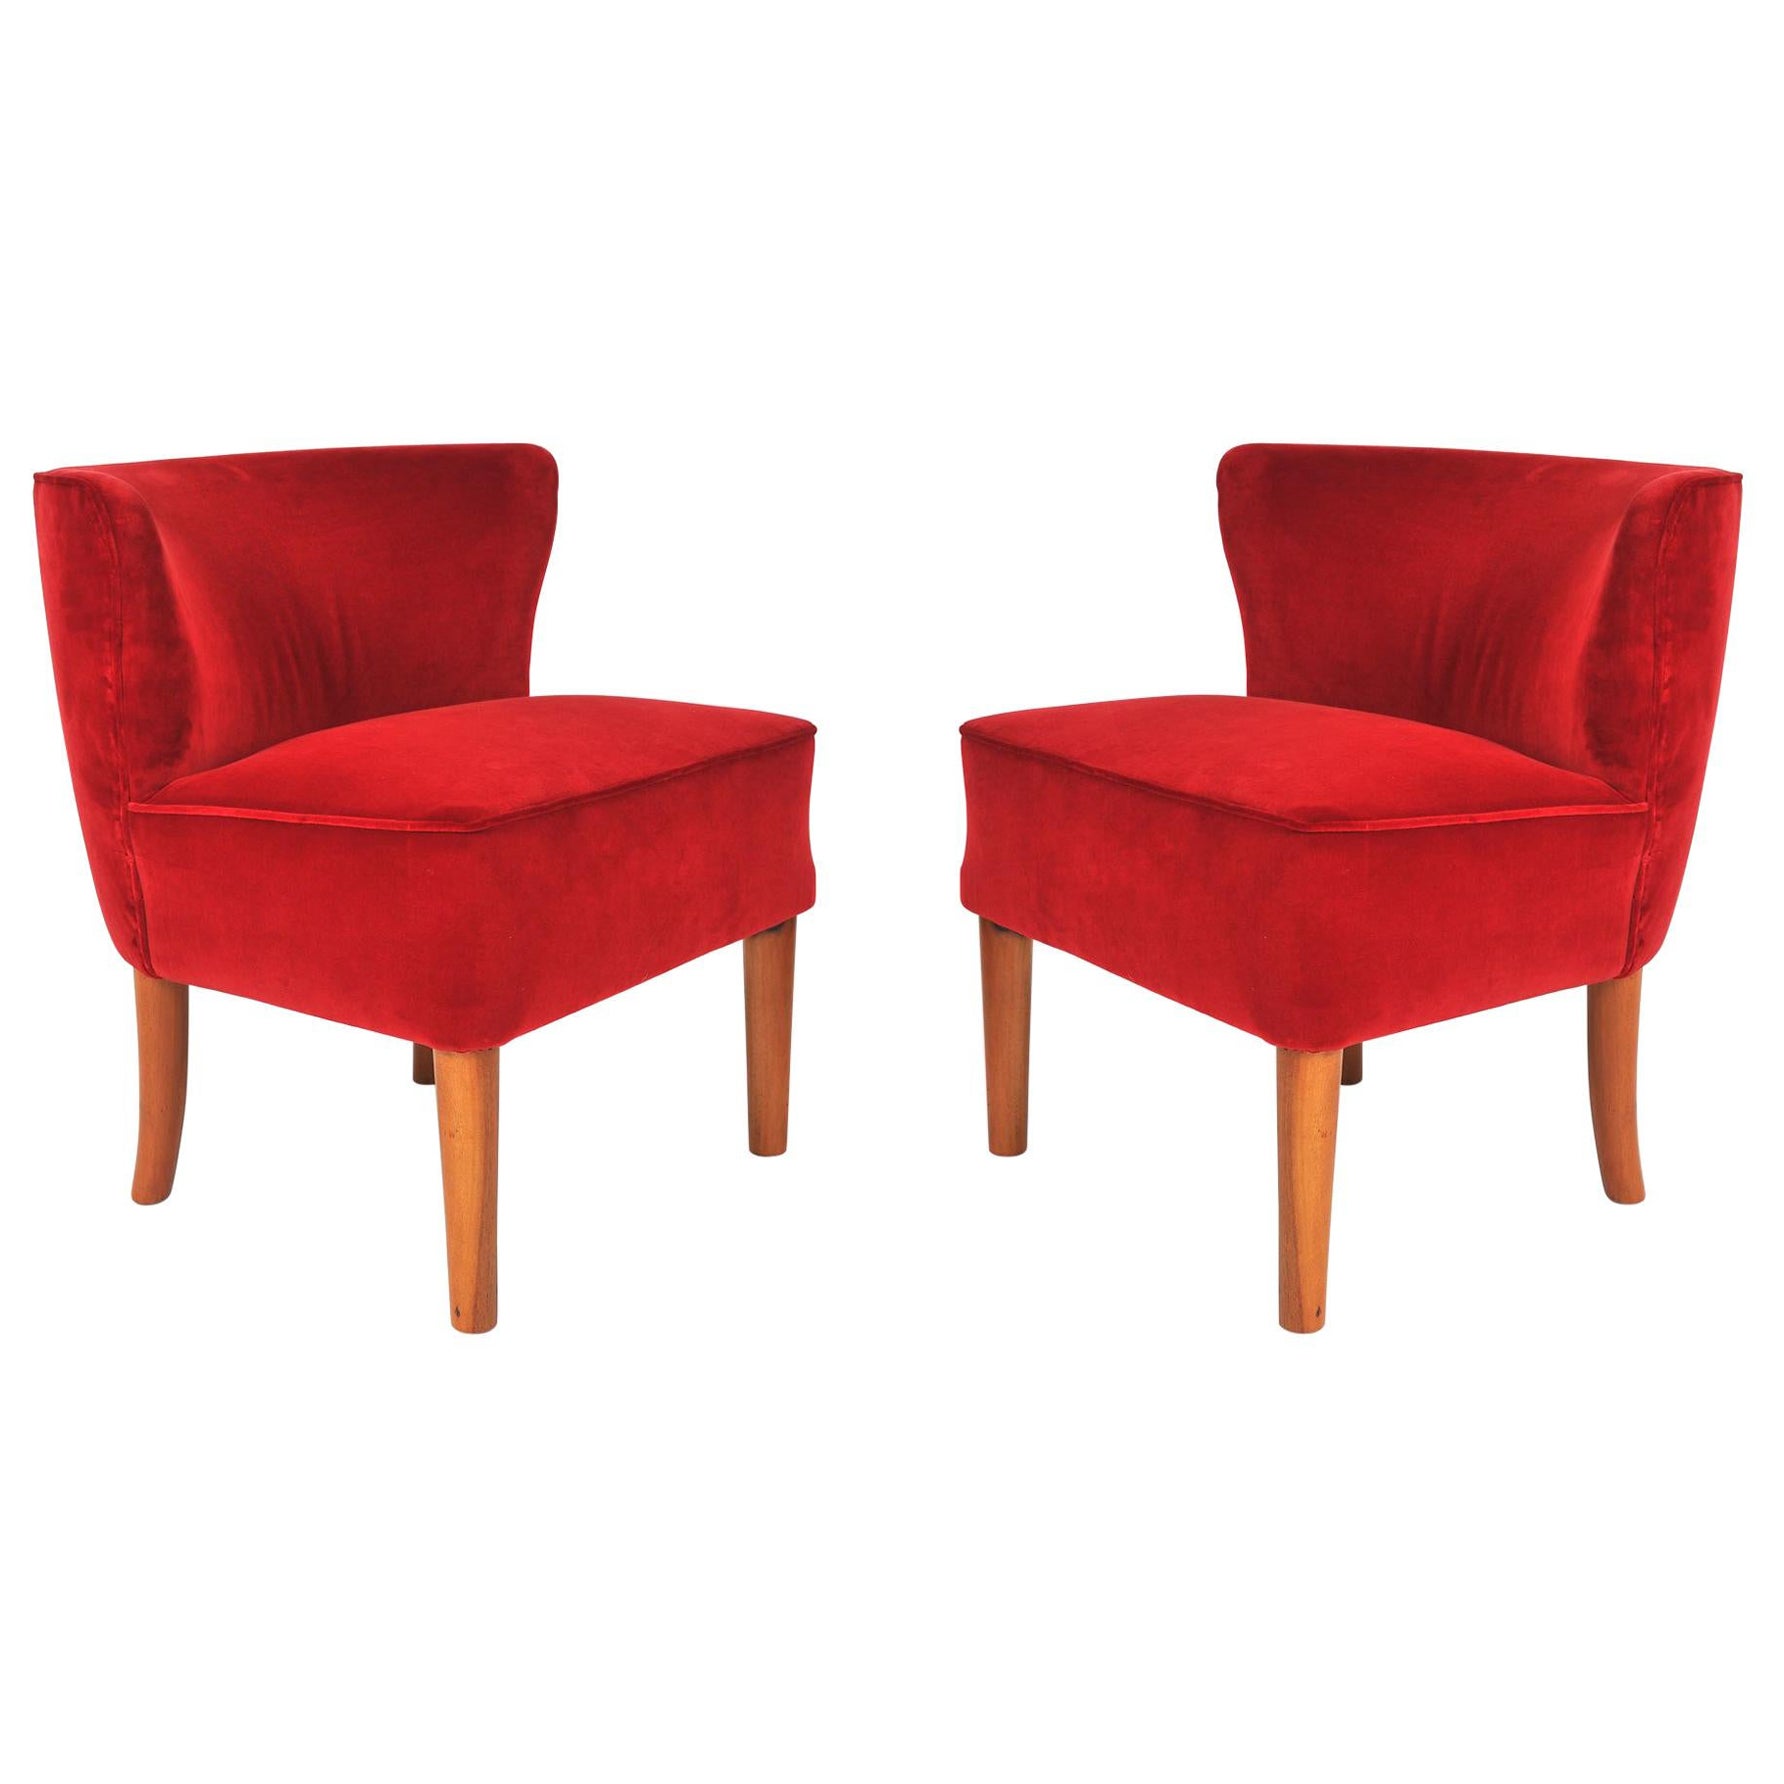 Pair of 1950s Italian Red Occasional Chairs